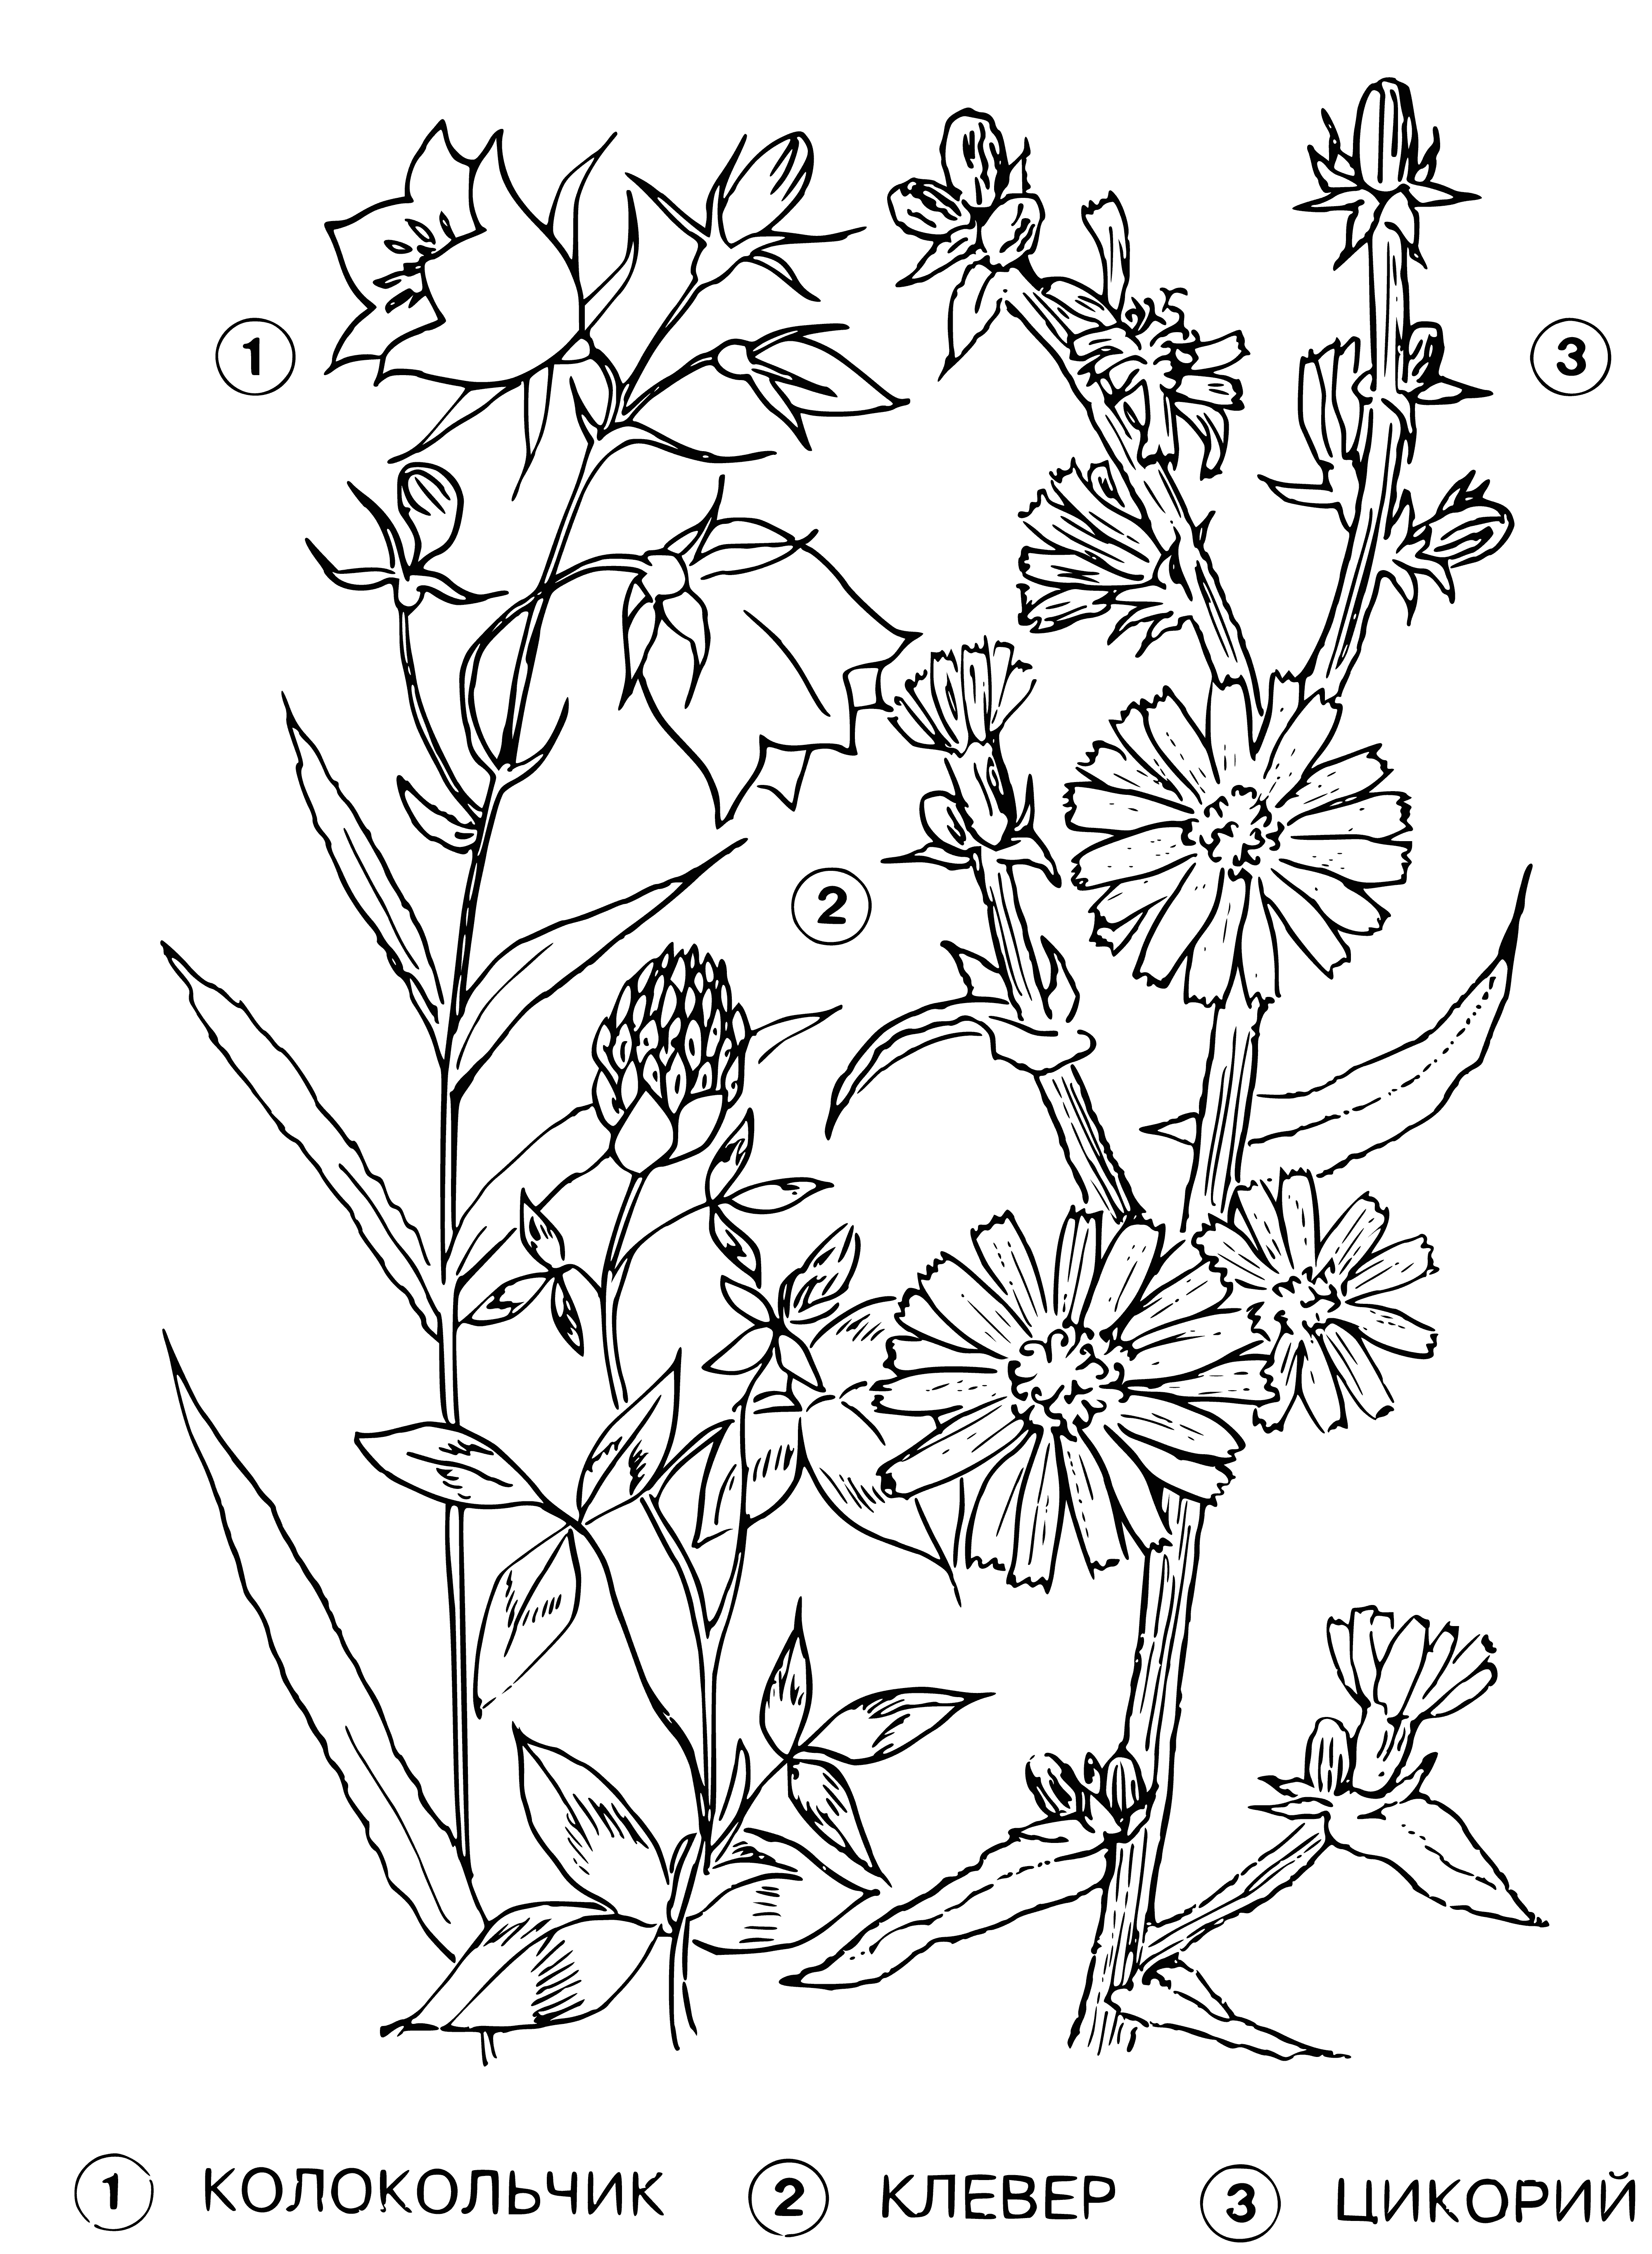 coloring page: 3 flowers in coloring pg: bell-light green, clover-dark green, chicory-blue.